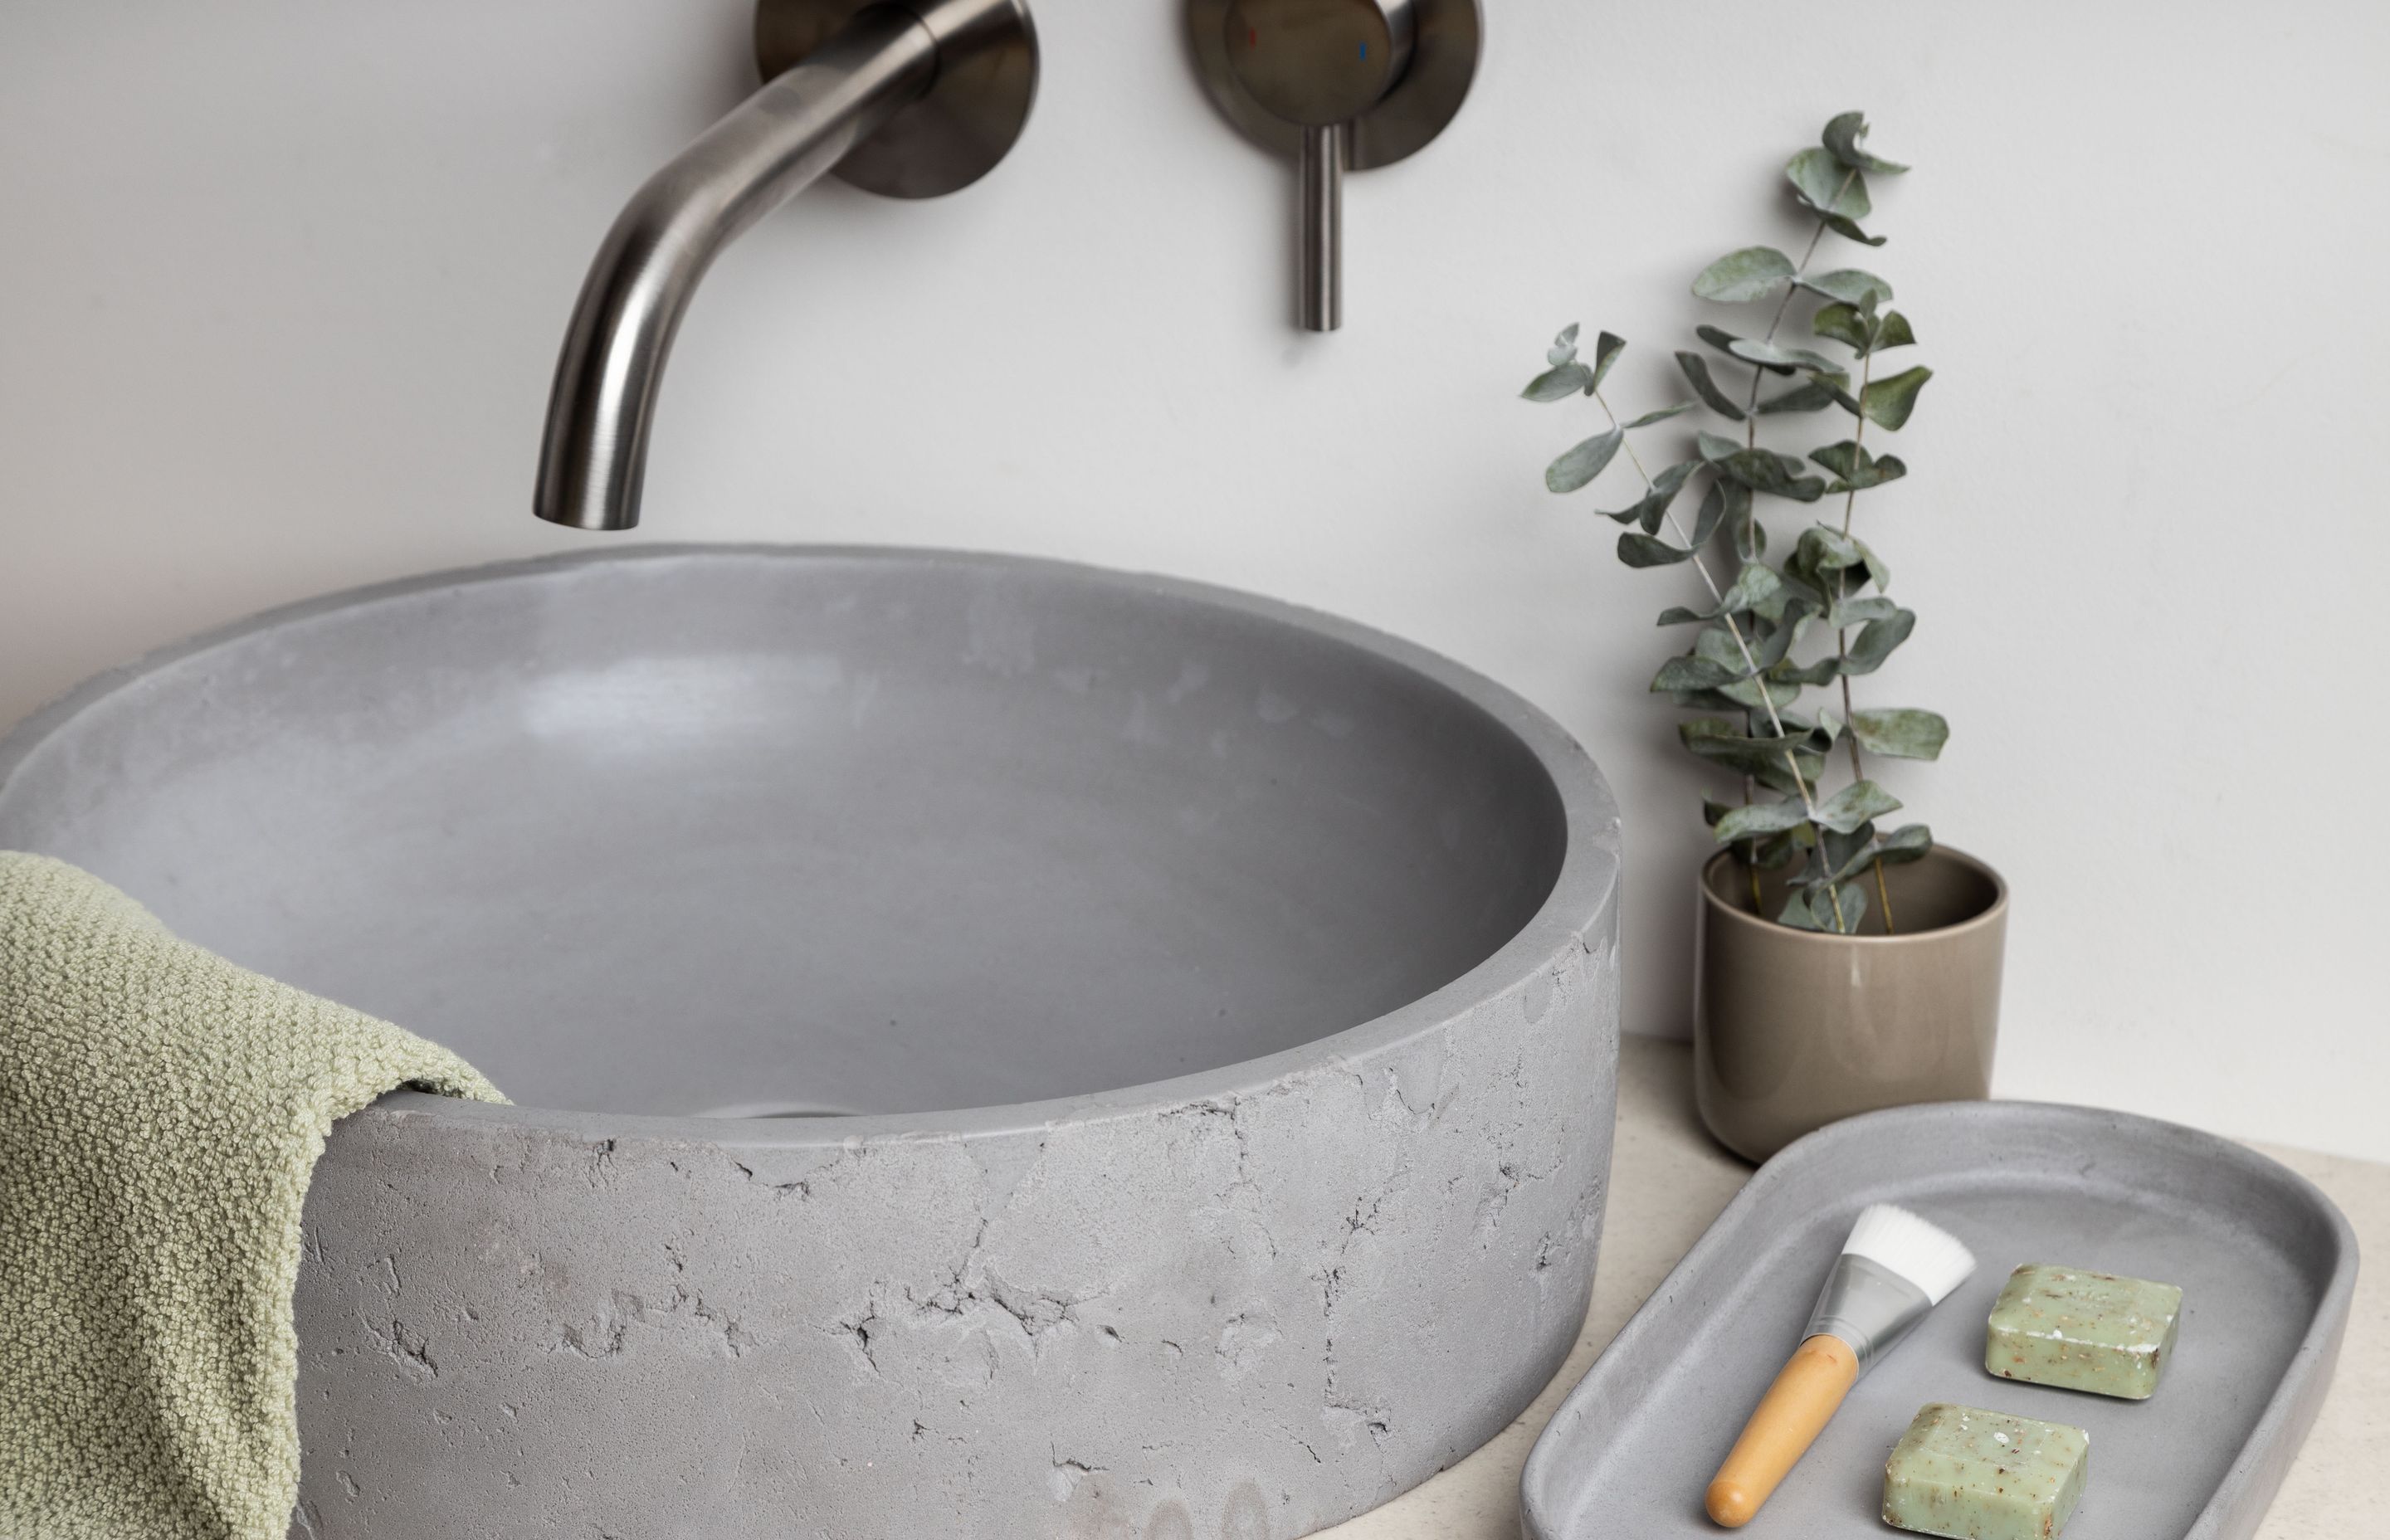 Elite Bathroomware's concrete basins are locally handcrafted, with each basin offering unique, natural beauty.